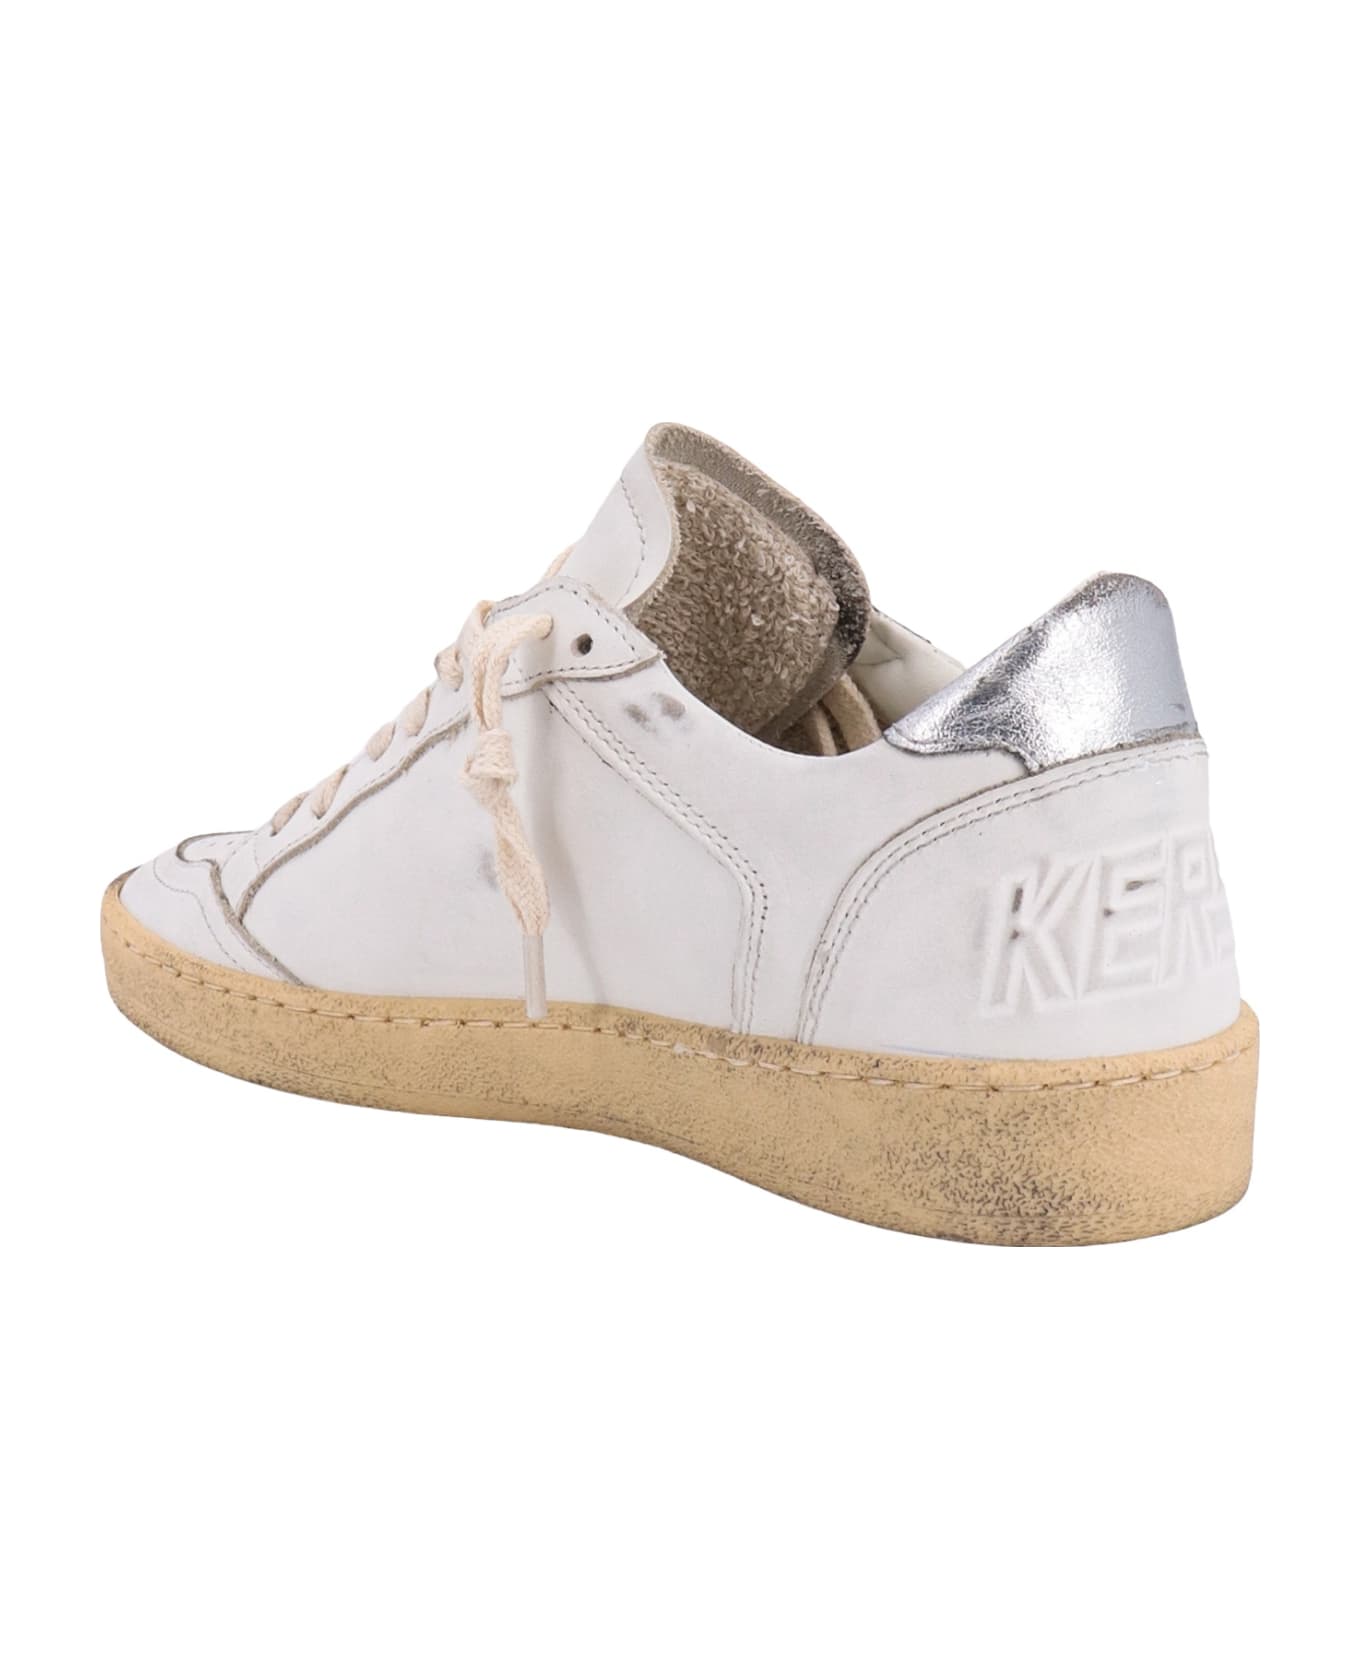 Golden Goose Ball Star Double Quarter Leather Sneakers - White/Ice/Silver